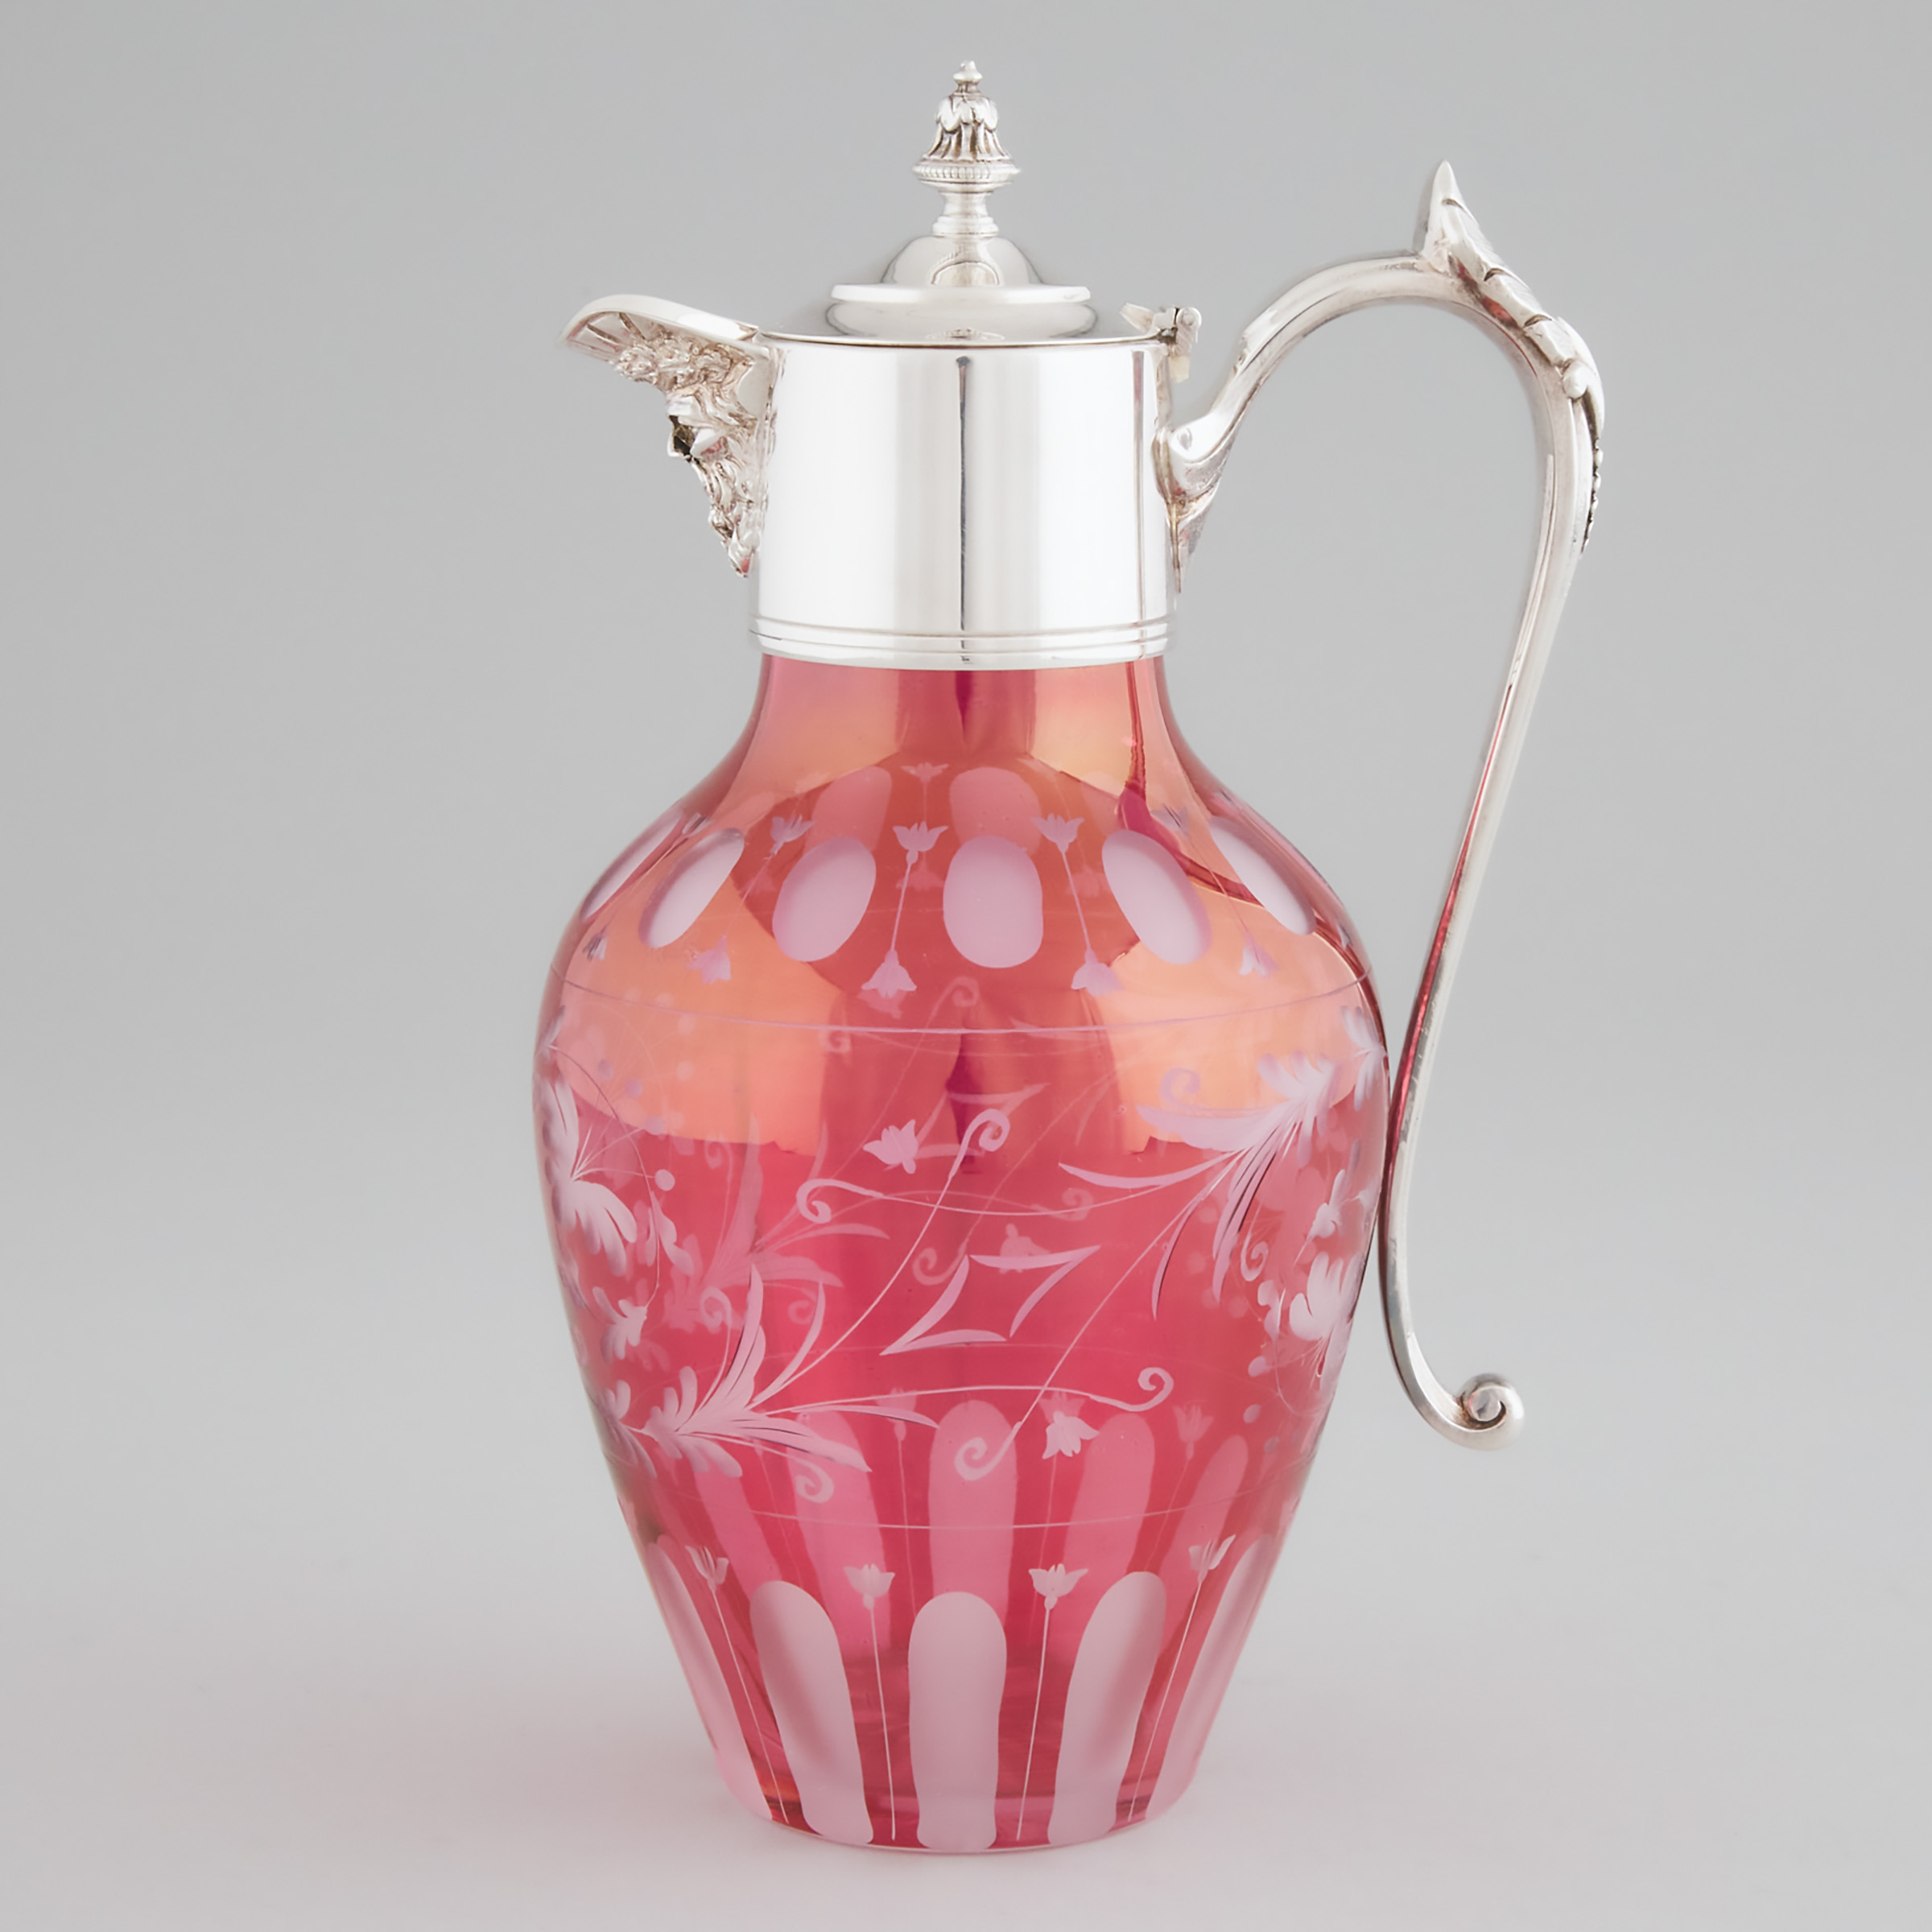 Victorian Silver Plate Mounted Red Cut Glass Claret Jug, John Turton & Co., Sheffield, late 19th century